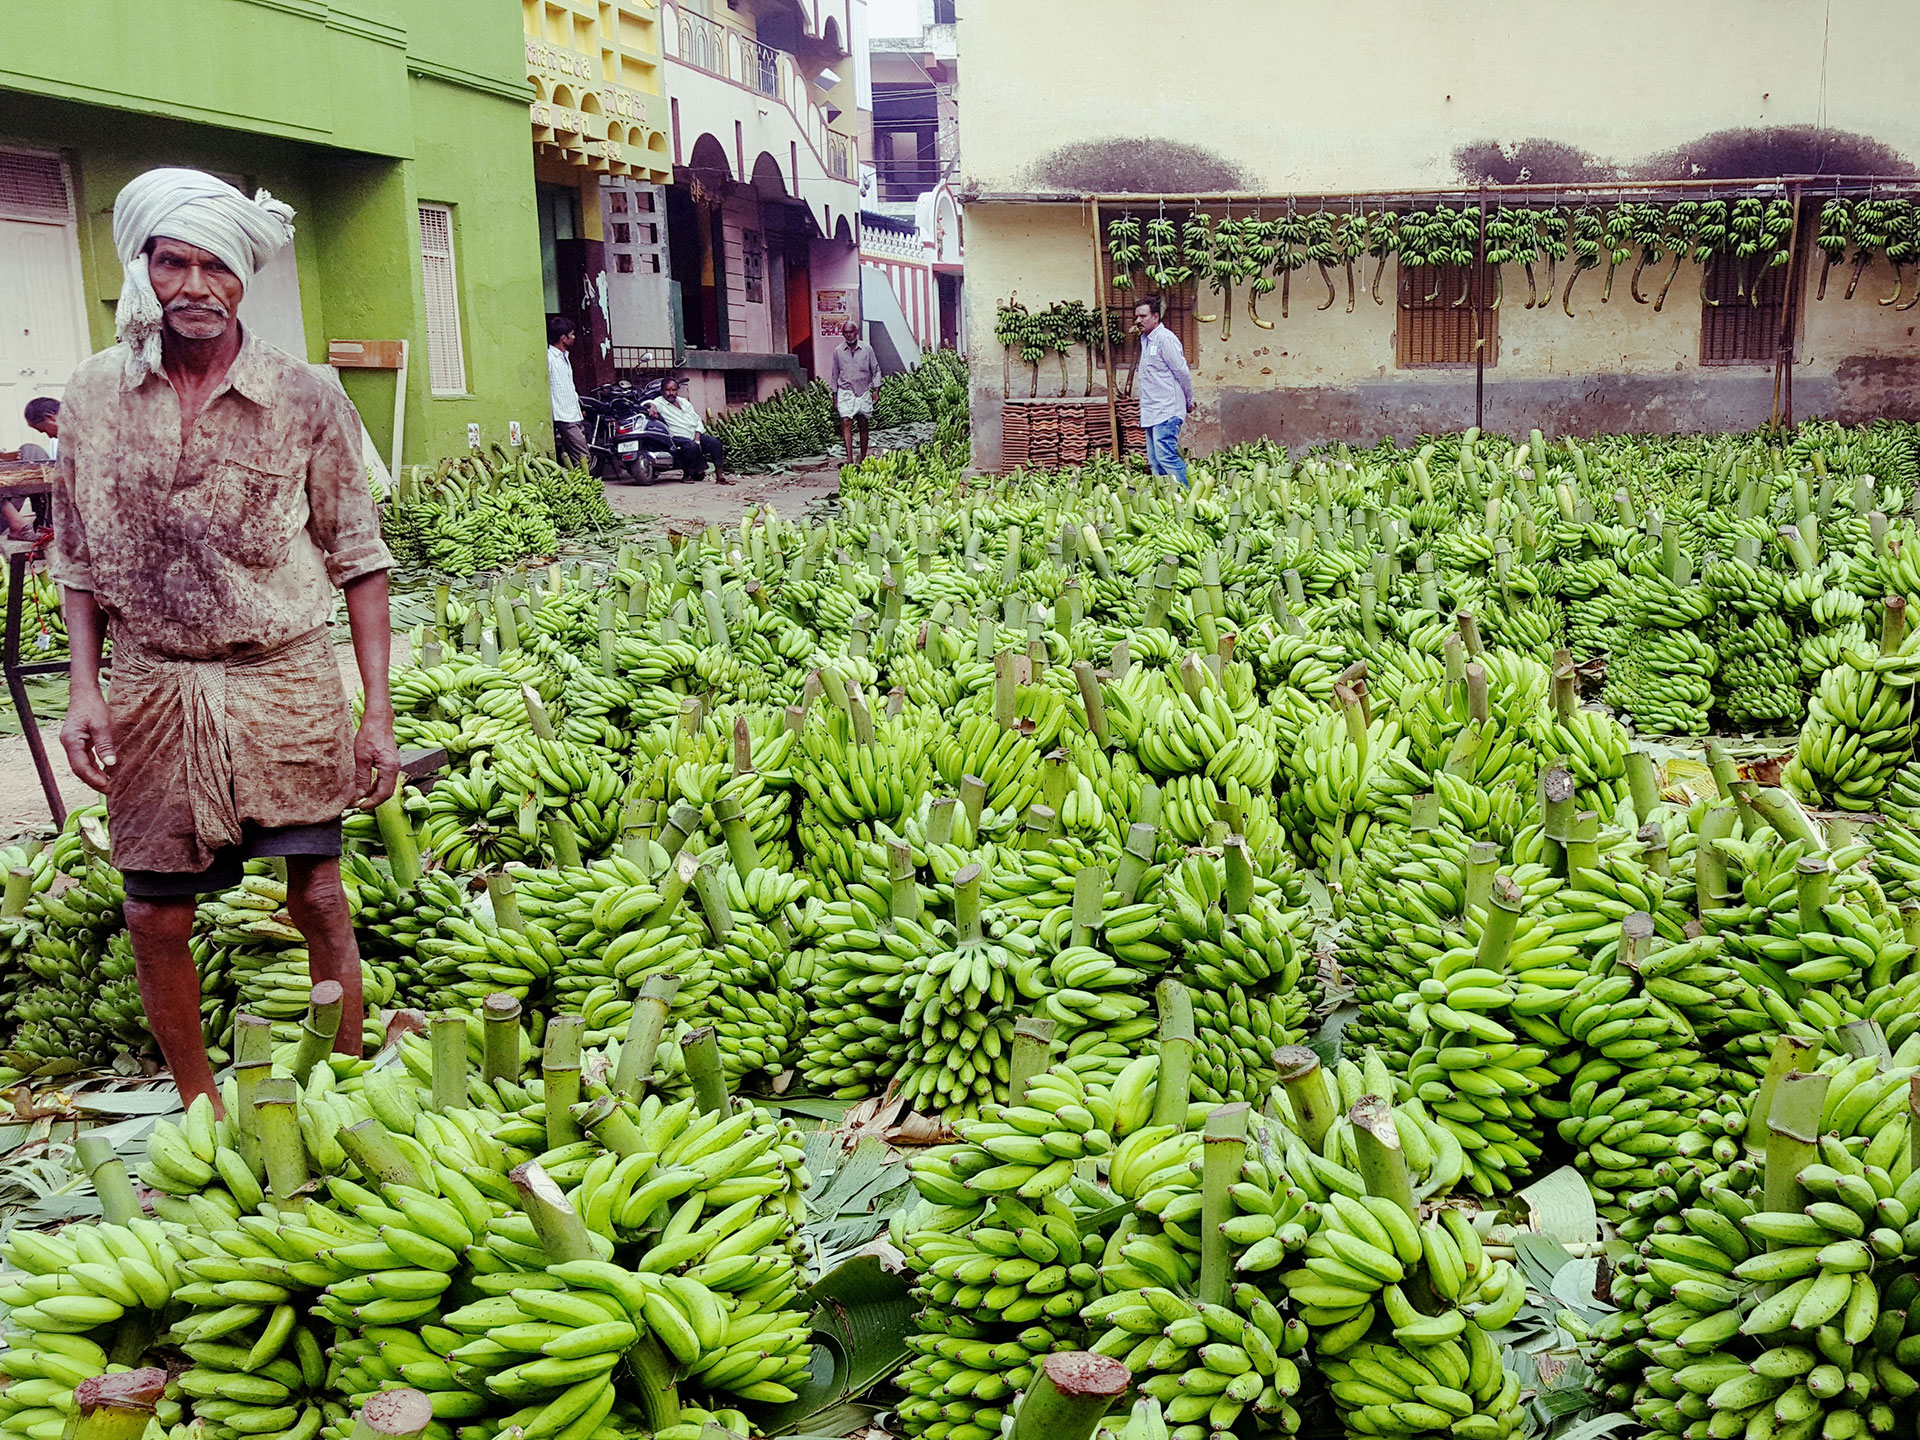 Man wearing a turban in a large banana market in India